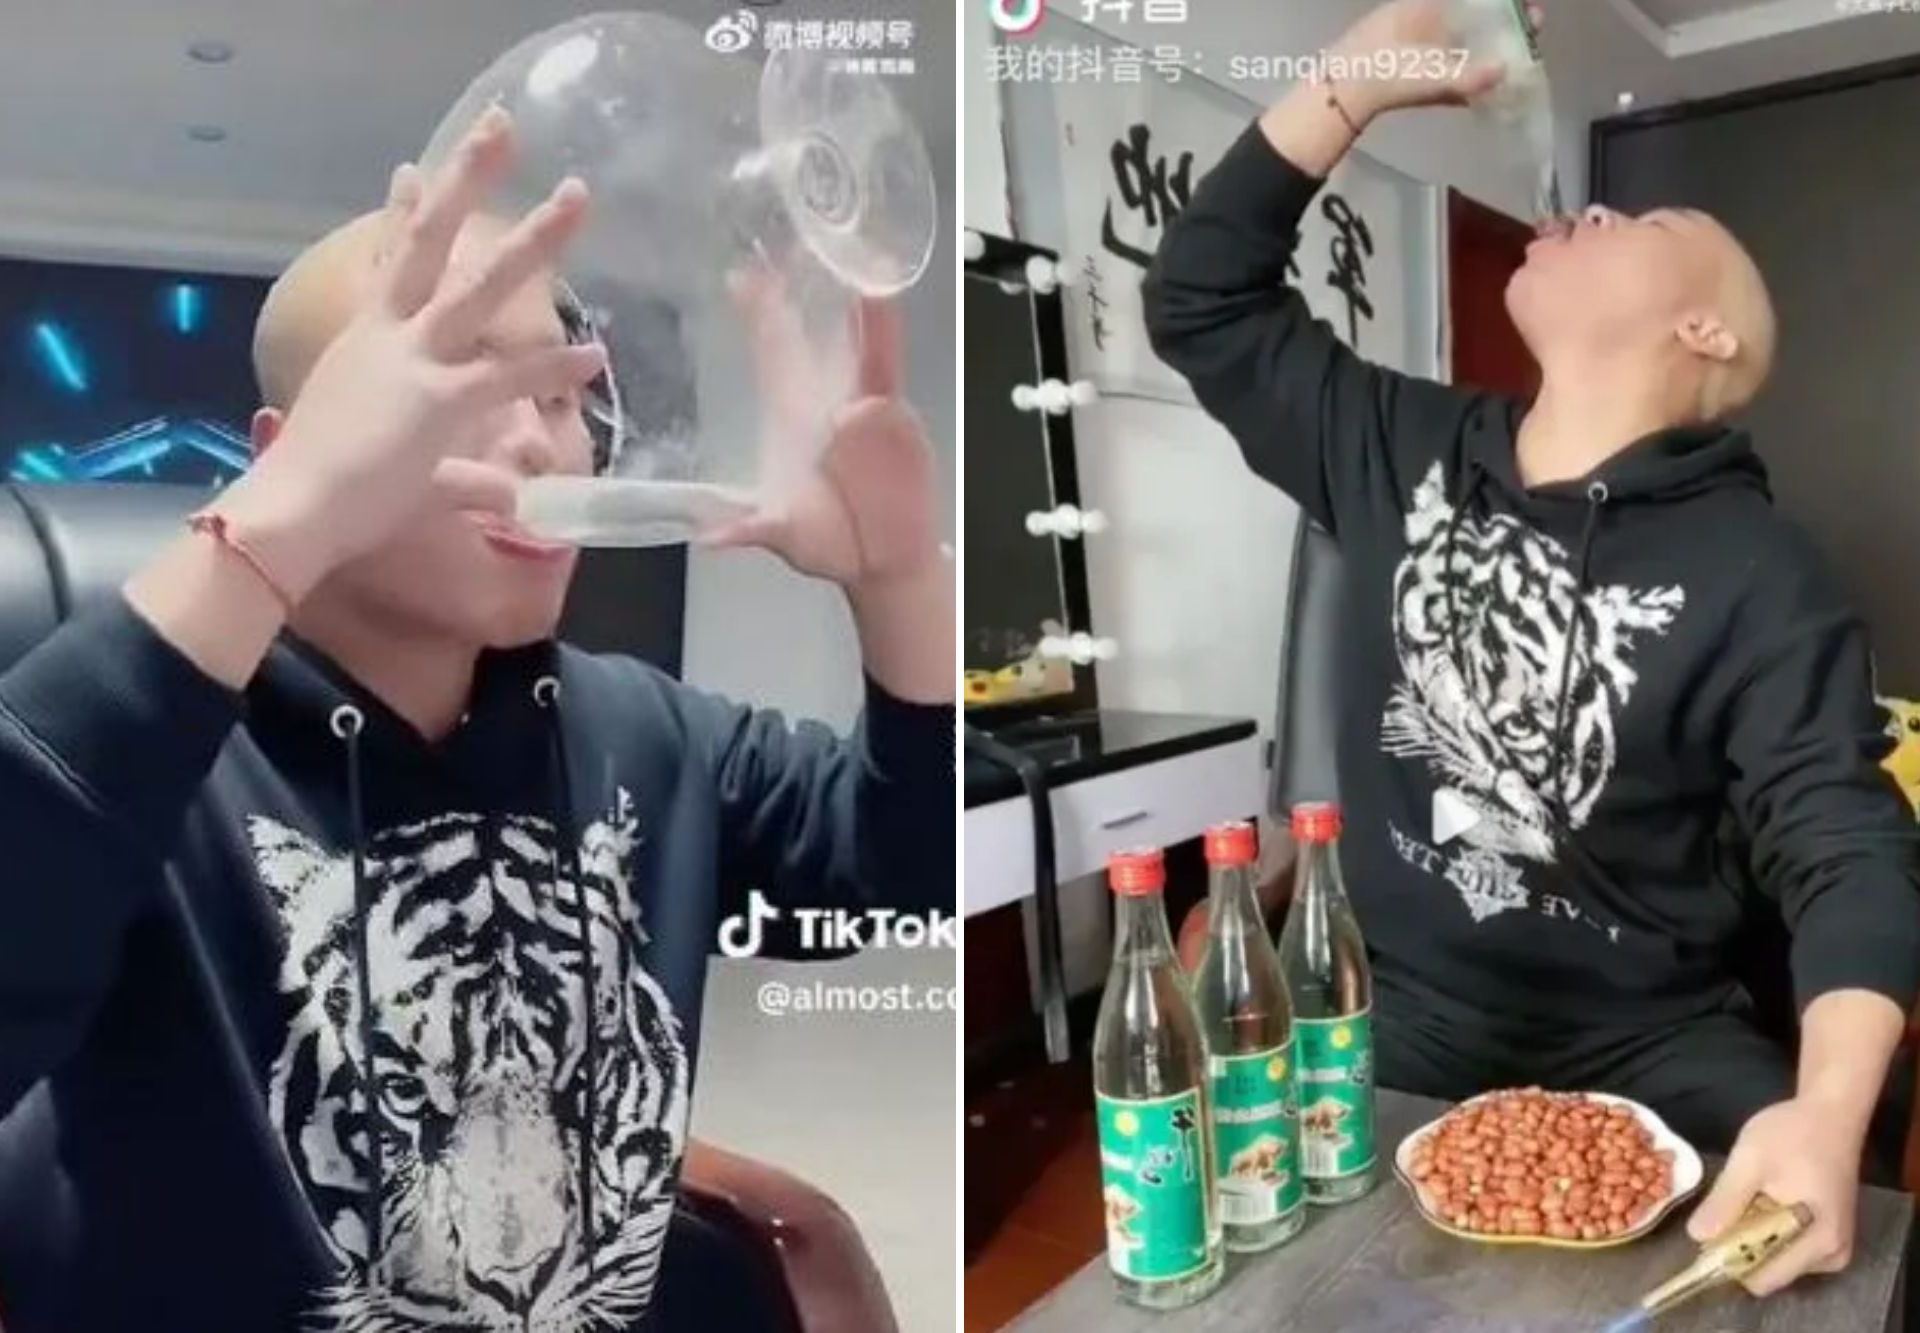 Influencer dies after live-streaming himself drinking strong Chinese alcohol